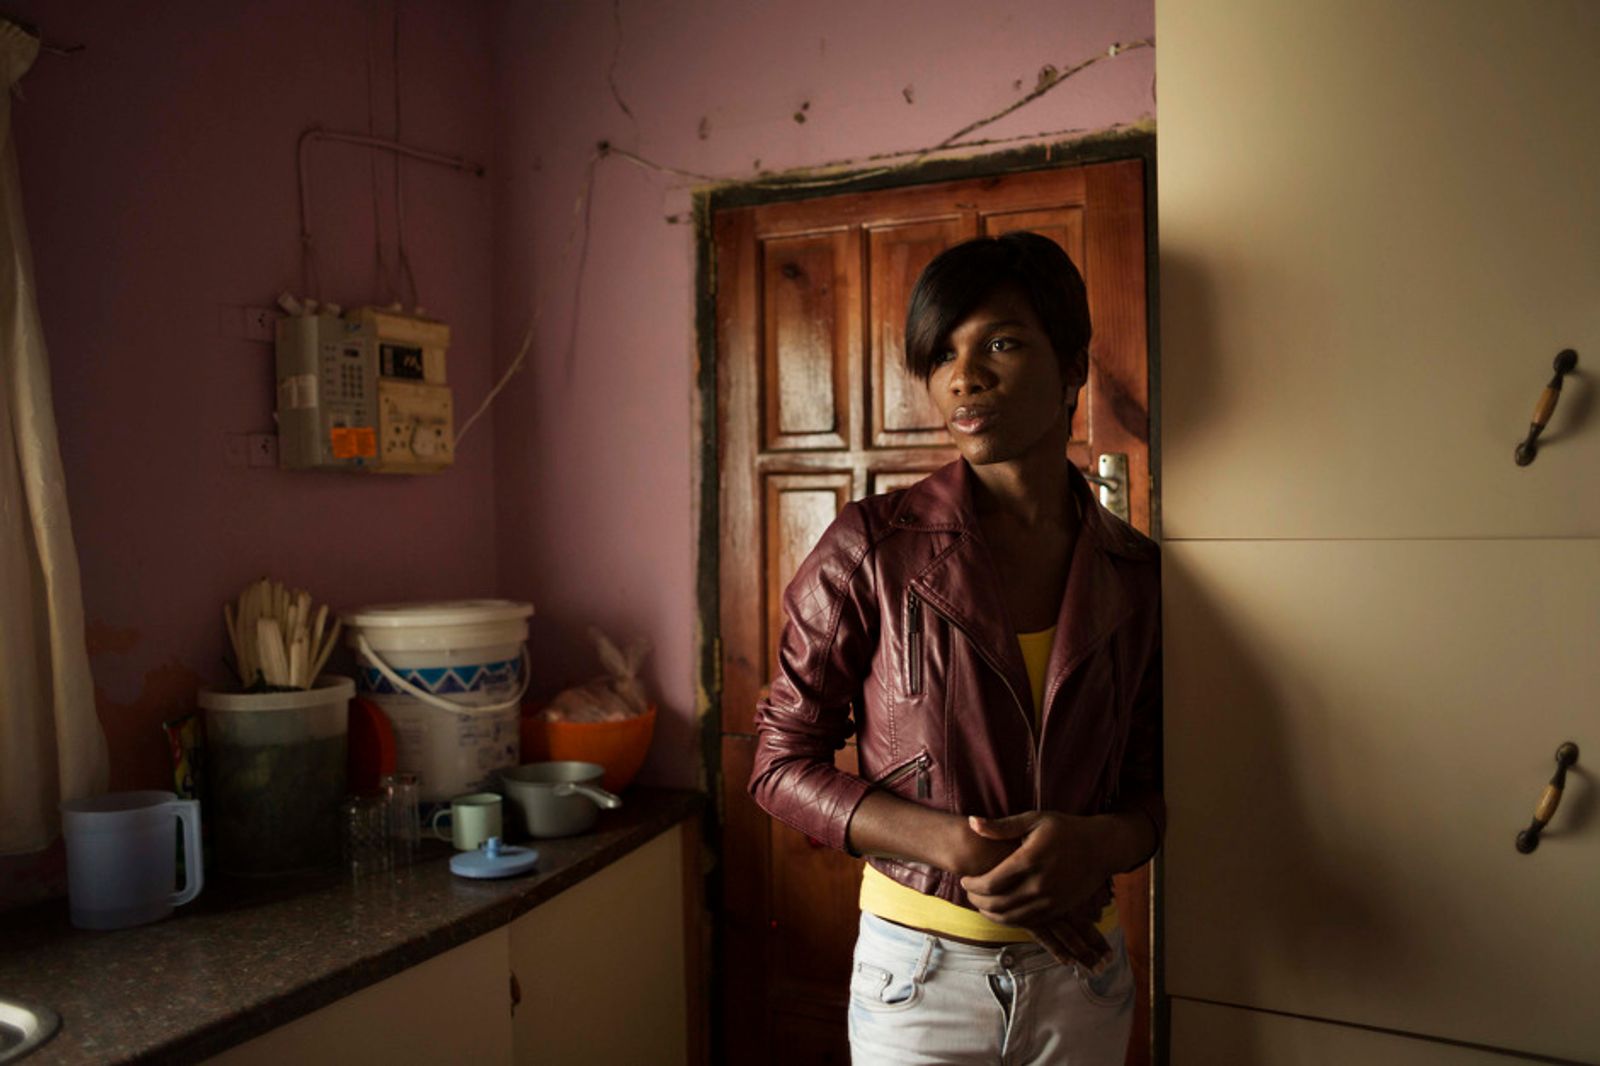 © Corinna Kern - Image from the Mama Africa photography project